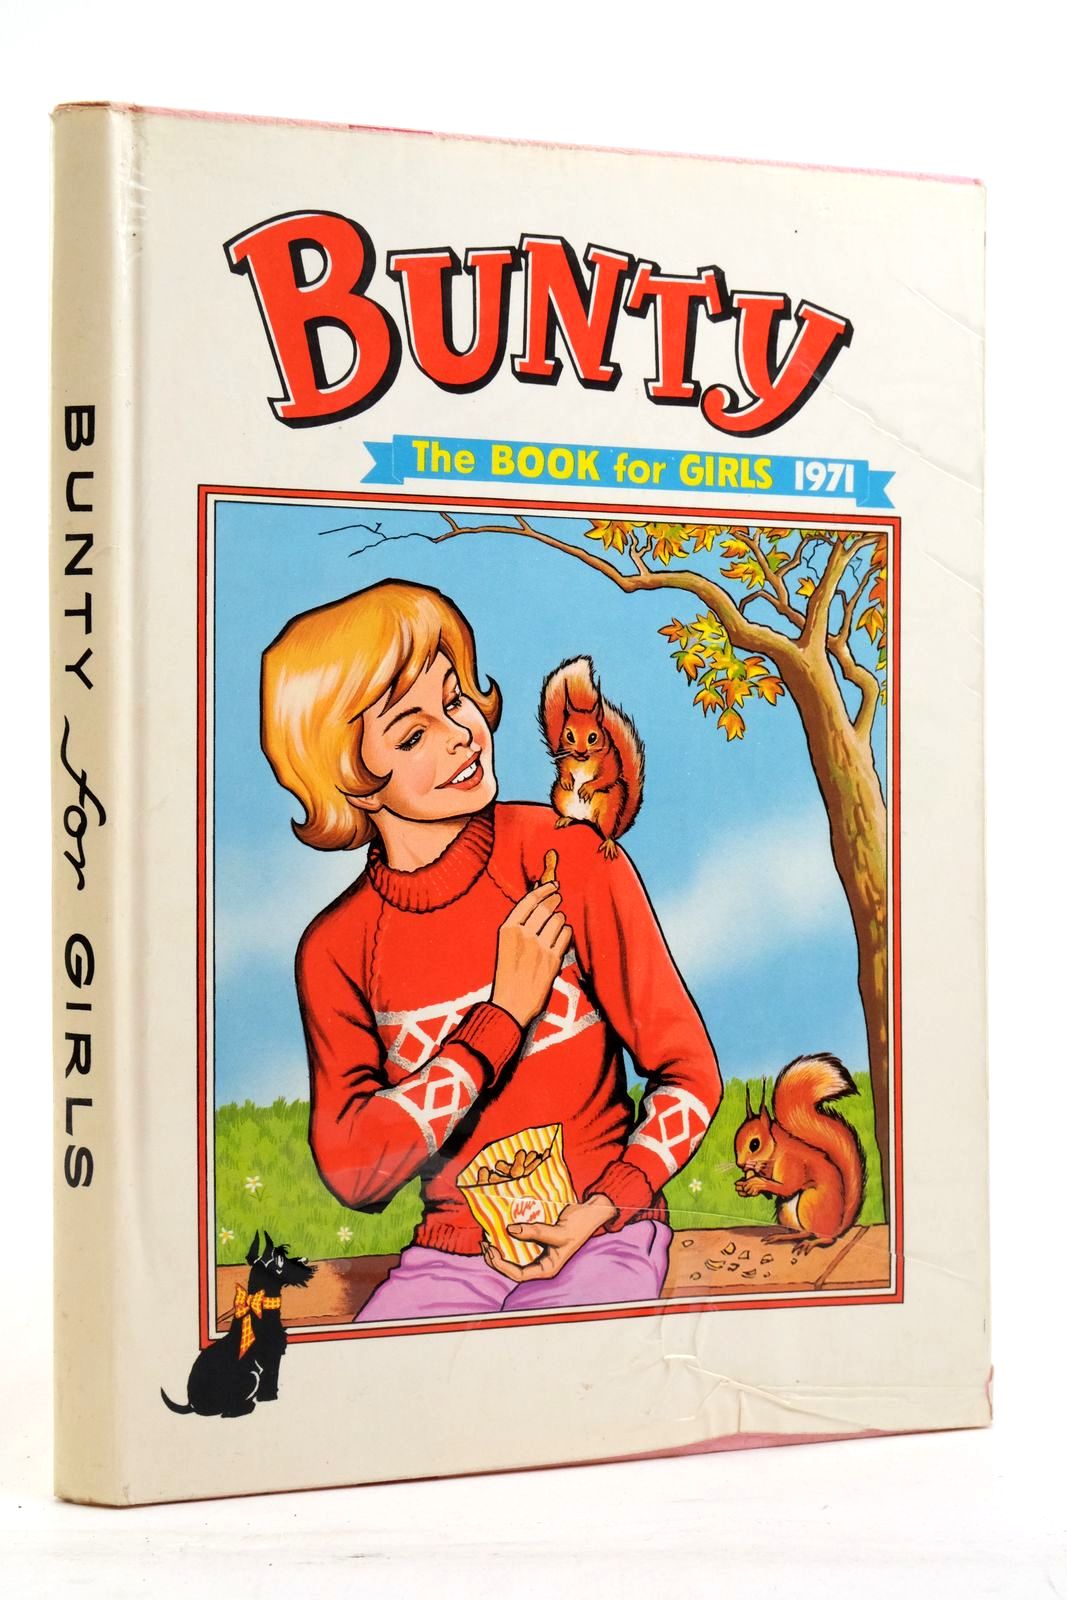 Photo of BUNTY FOR GIRLS 1971 published by D.C. Thomson &amp; Co Ltd. (STOCK CODE: 2138025)  for sale by Stella & Rose's Books